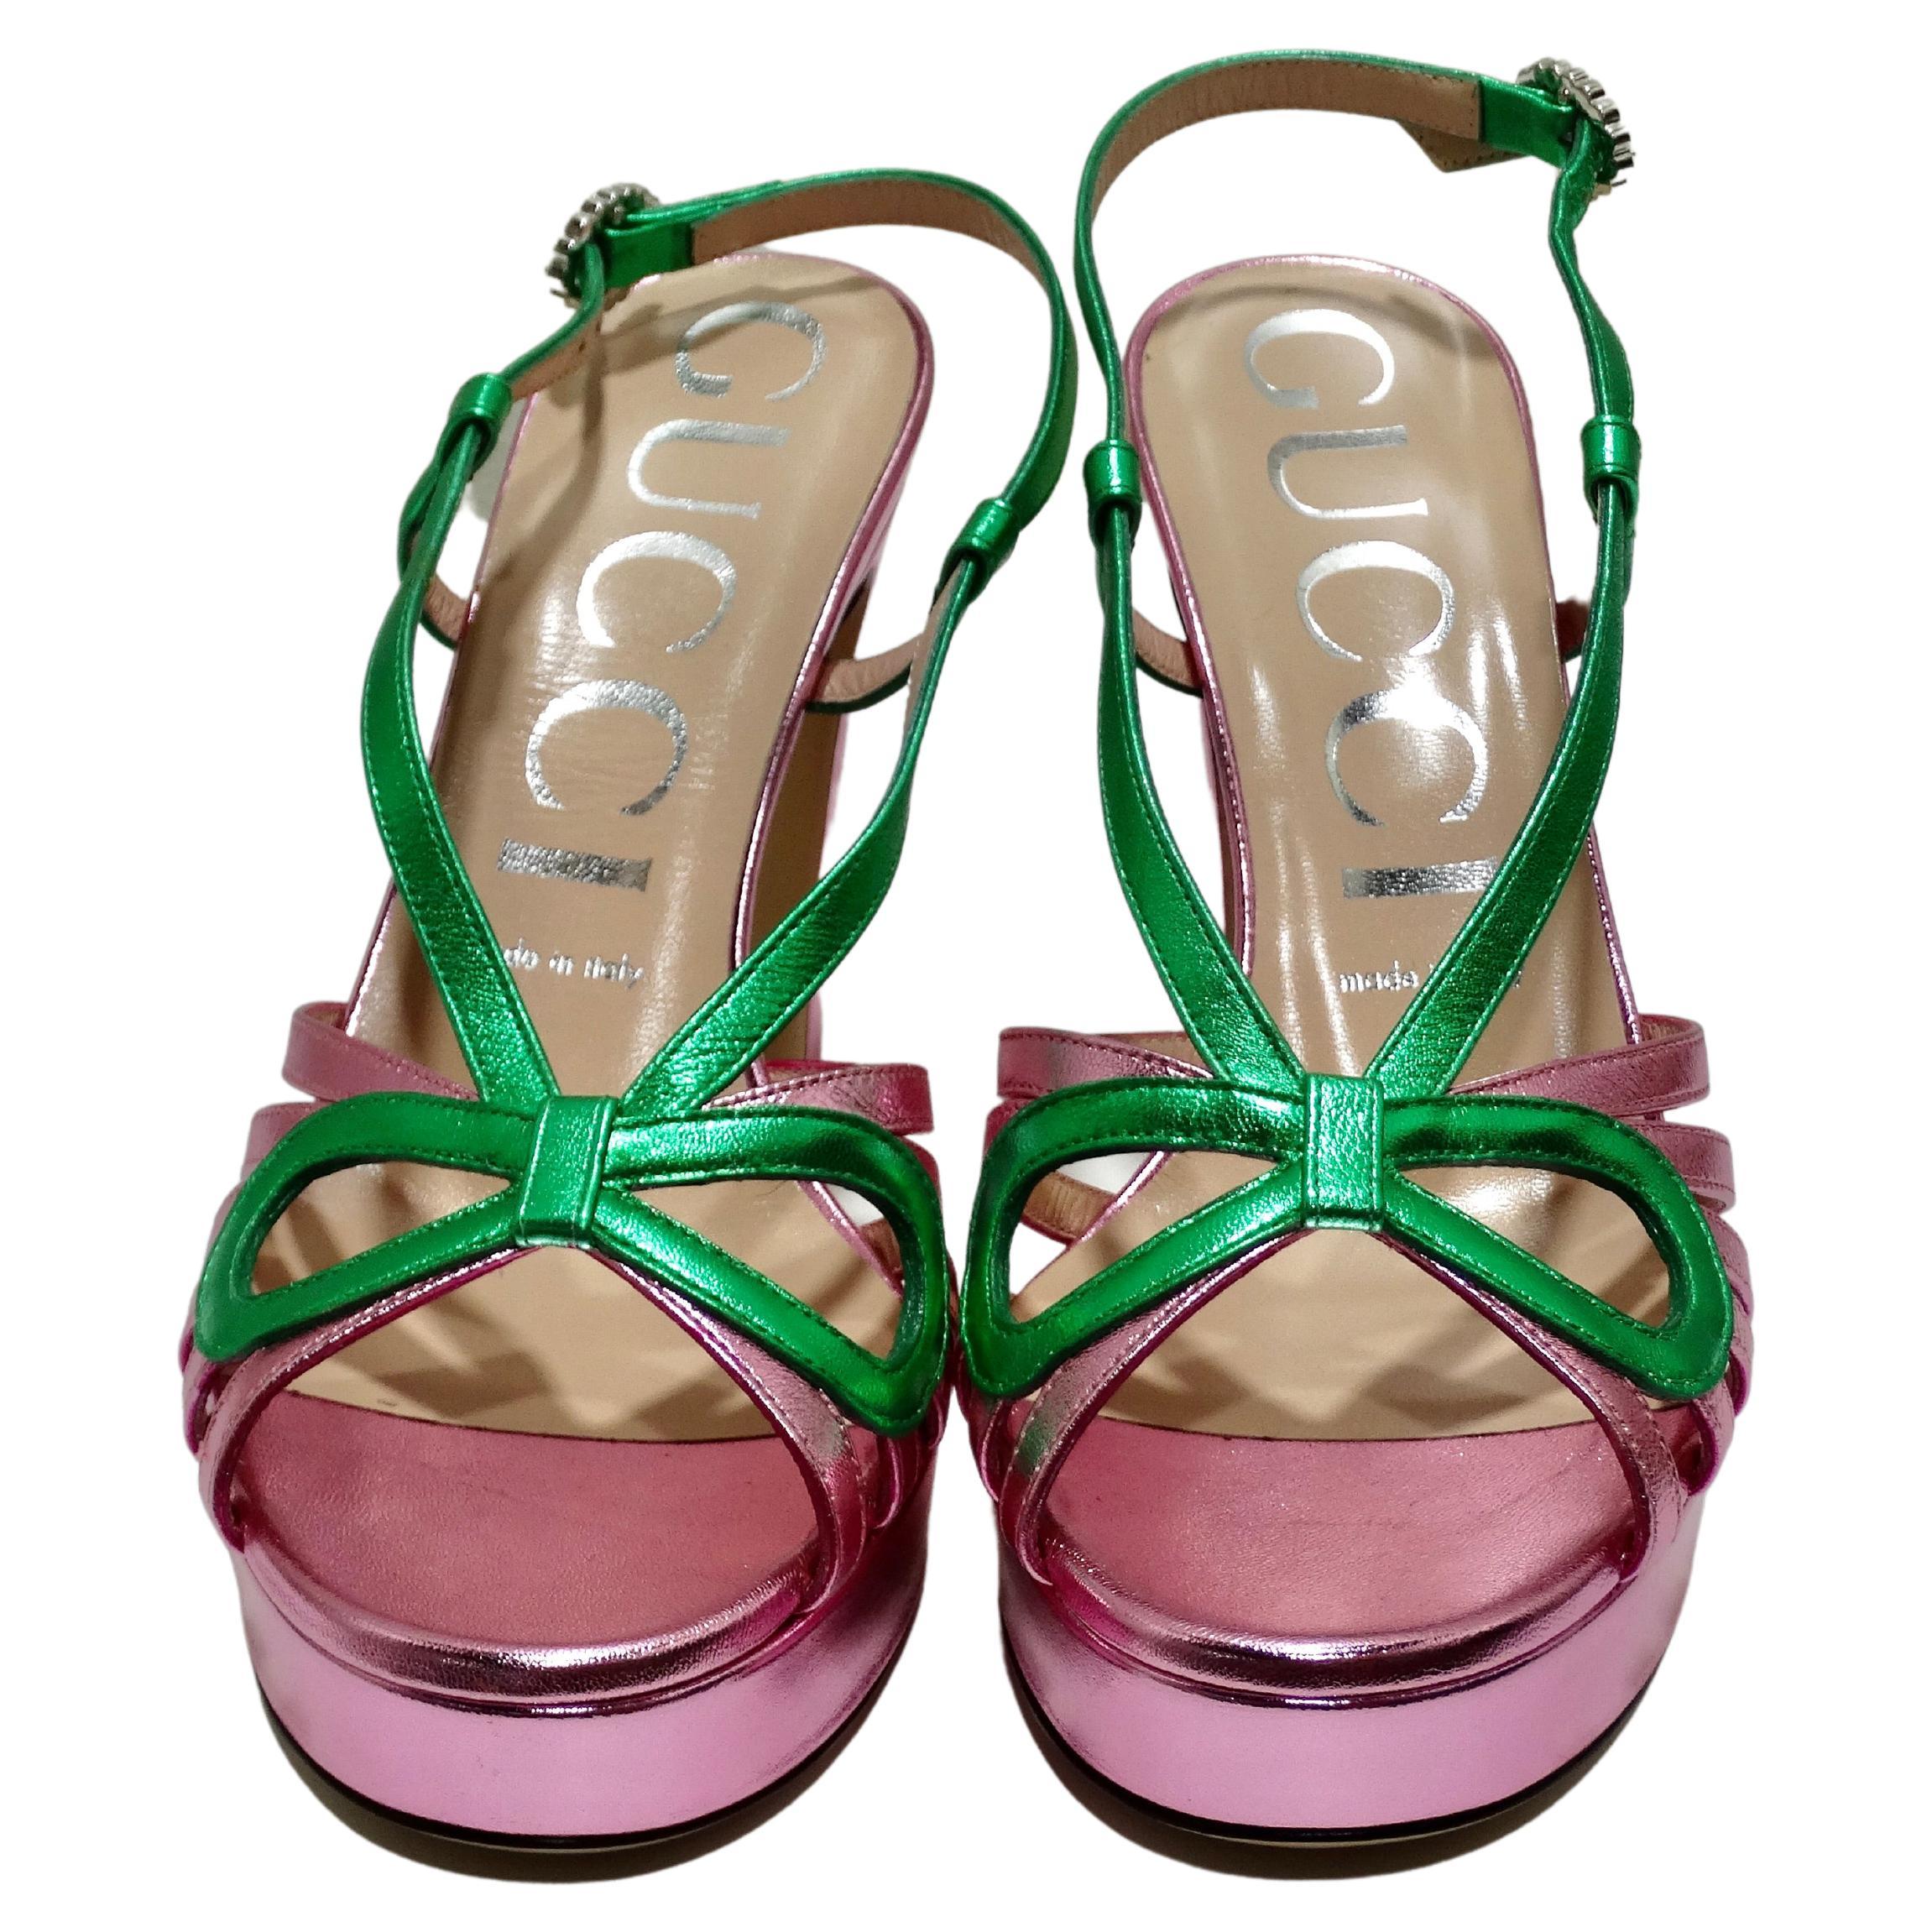 2018 Holiday Edition Gucci Pink Green Metallic Leather Crossed Bow Thick Heel. Reminiscent of styles worn in the 1920s and '30s, the cutout sandal is reinterpreted on a high-heeled platform. The vintage influenced style in metallic leather has a